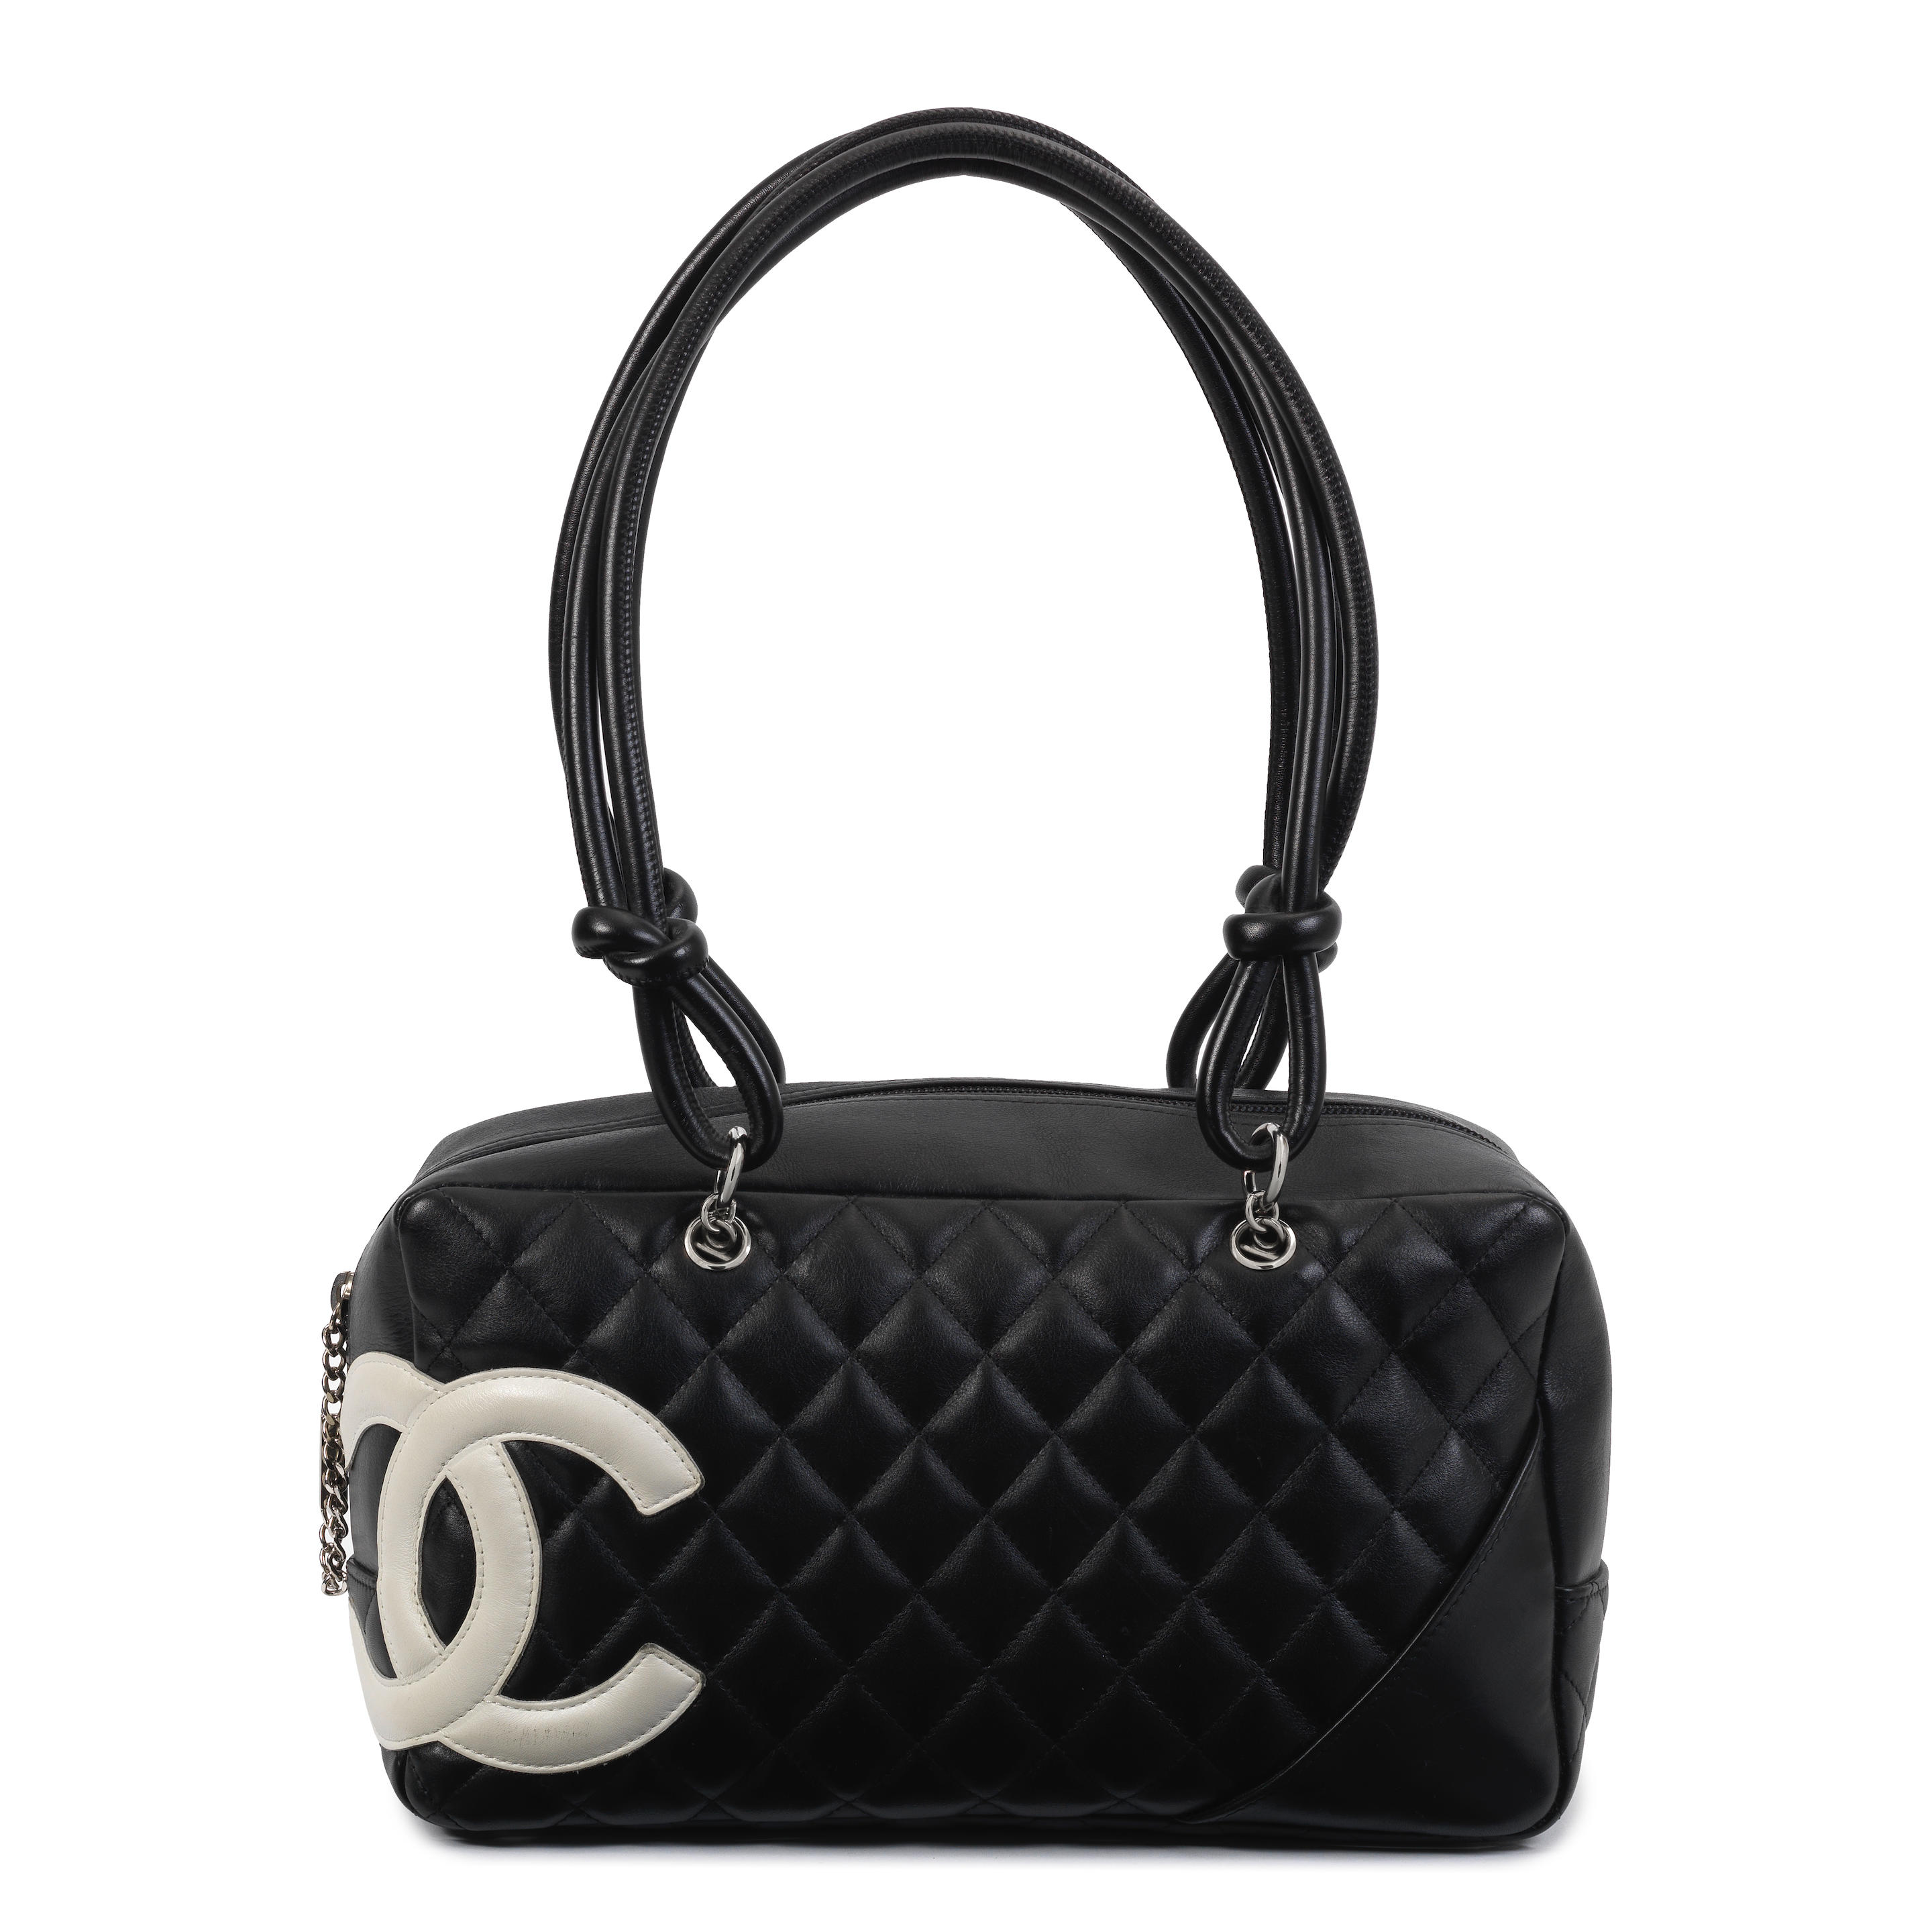 Bonhams : Chanel a Black and White Medium Cambon Ligne Bowling Bag 2004-05  (includes serial sticker and booklet)